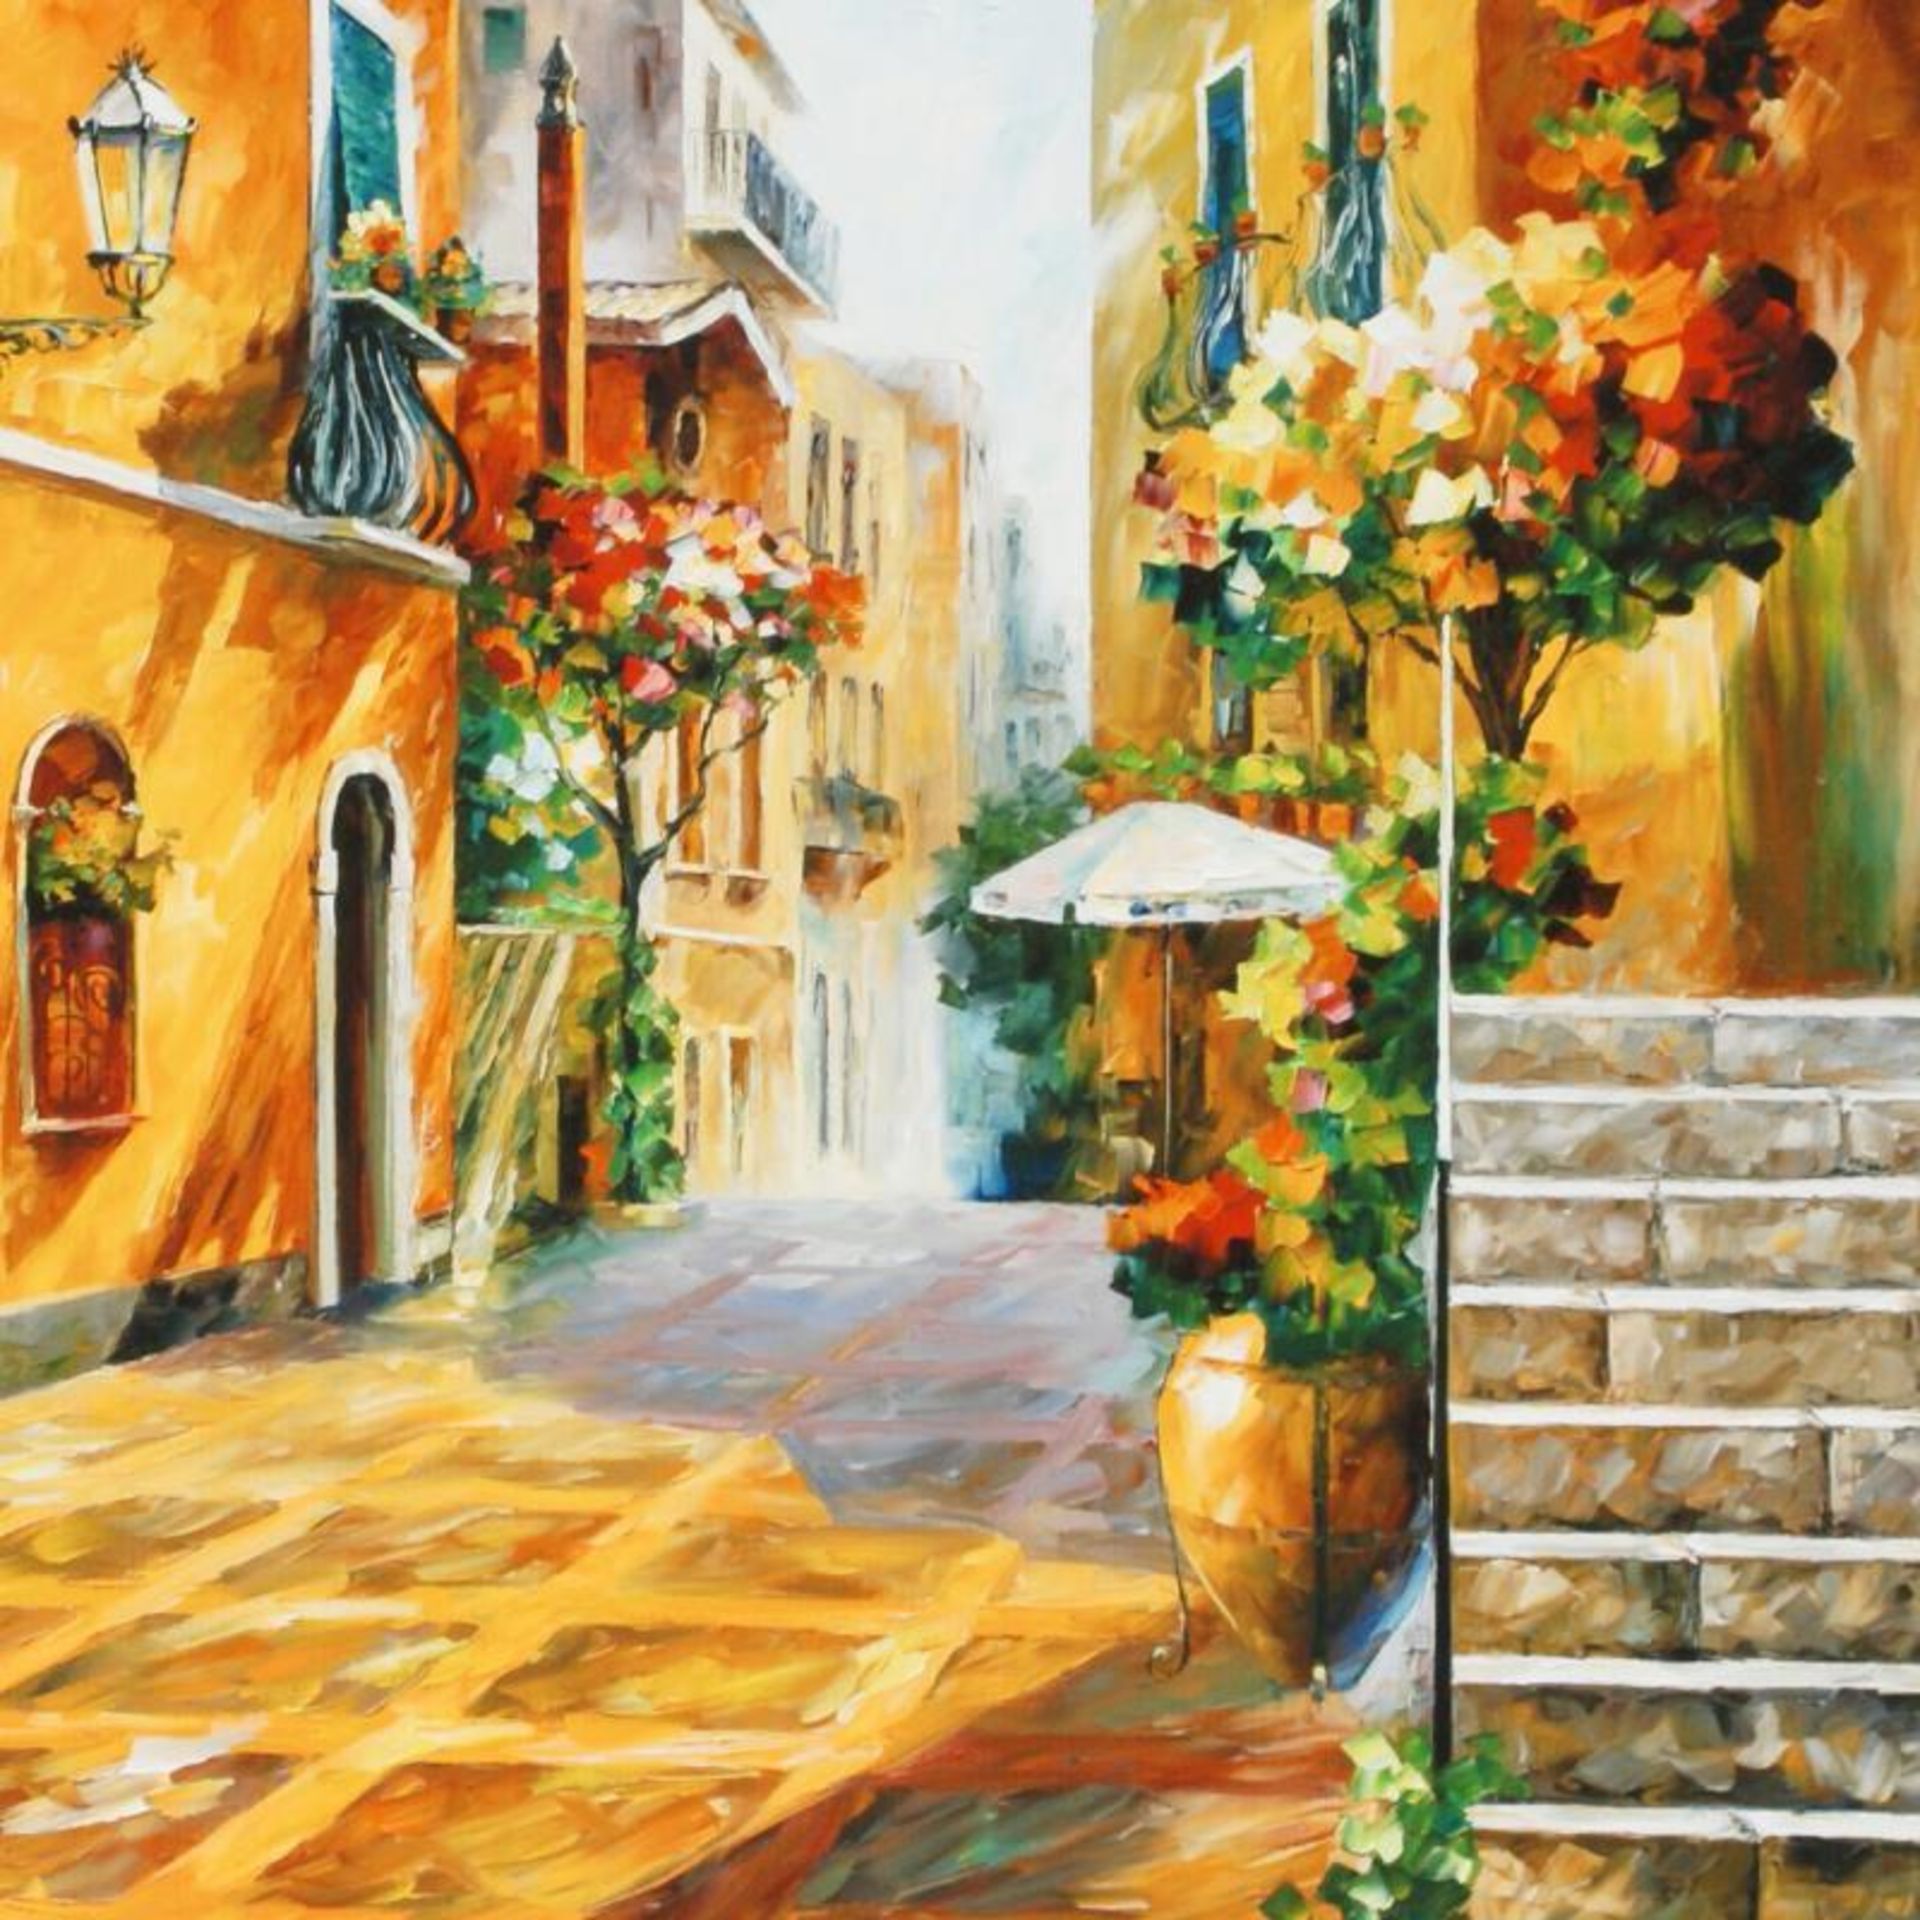 The Sun of Sicily by Afremov (1955-2019) - Image 2 of 3